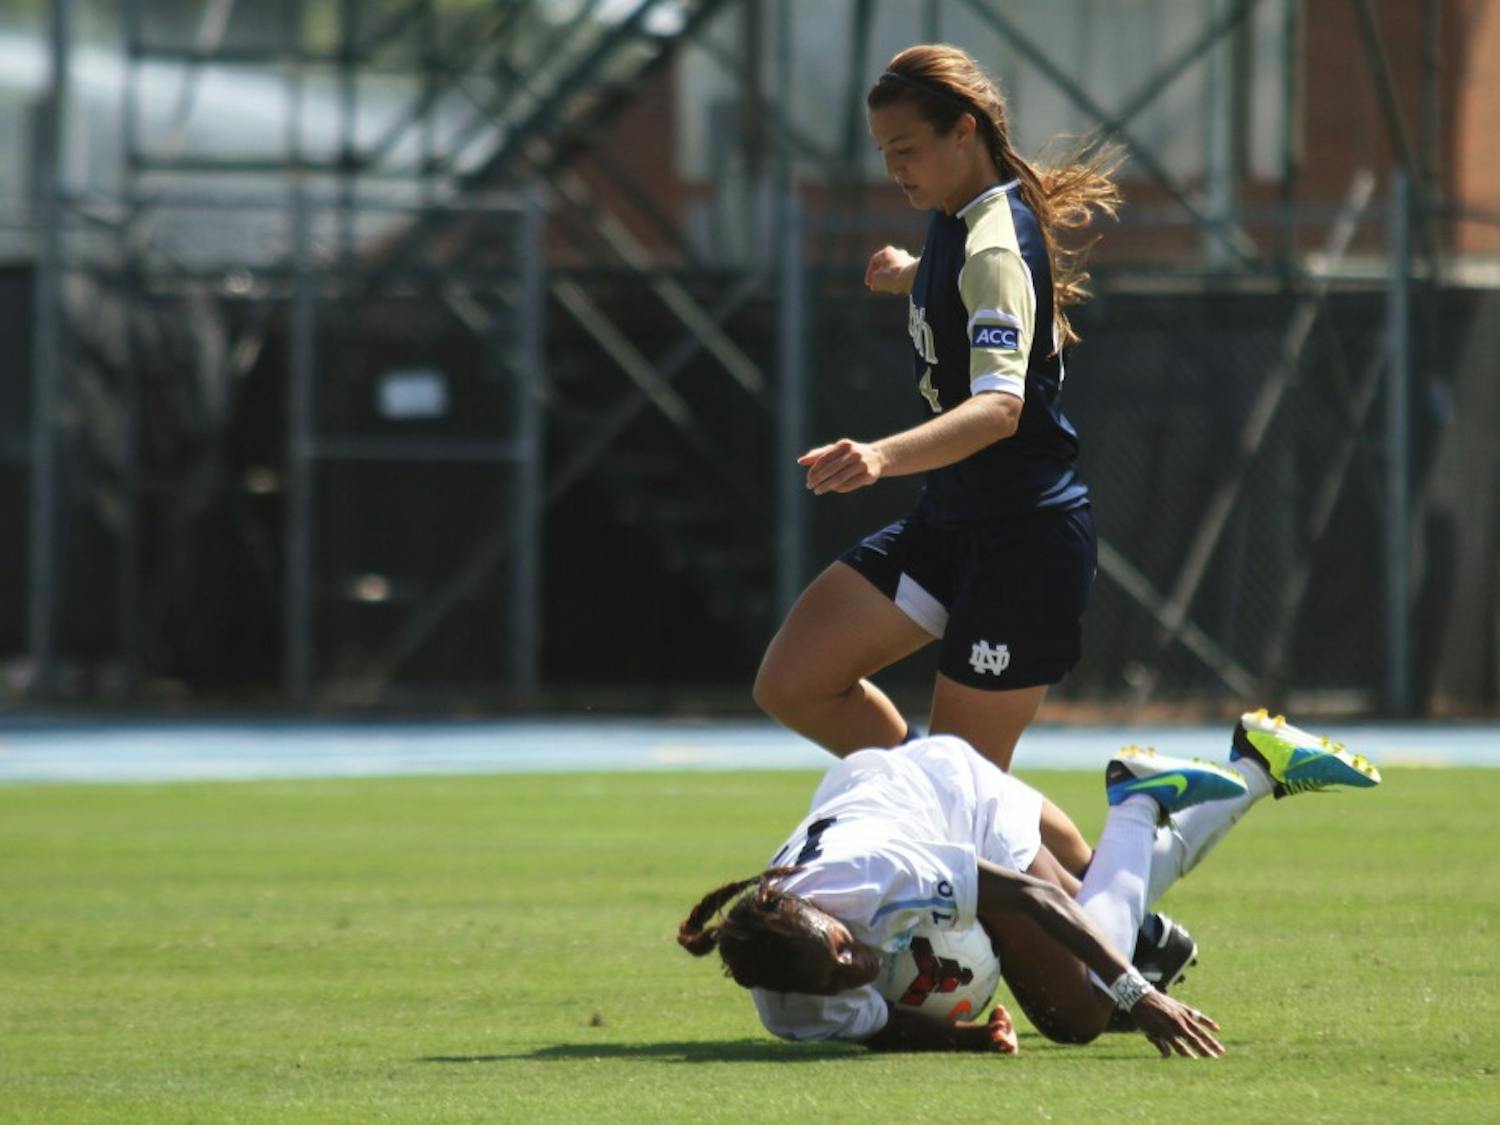 UNC women's soccer versus Norte Dame Irish on Sunday, September 15 at 1:00pm in Chapel Hill.